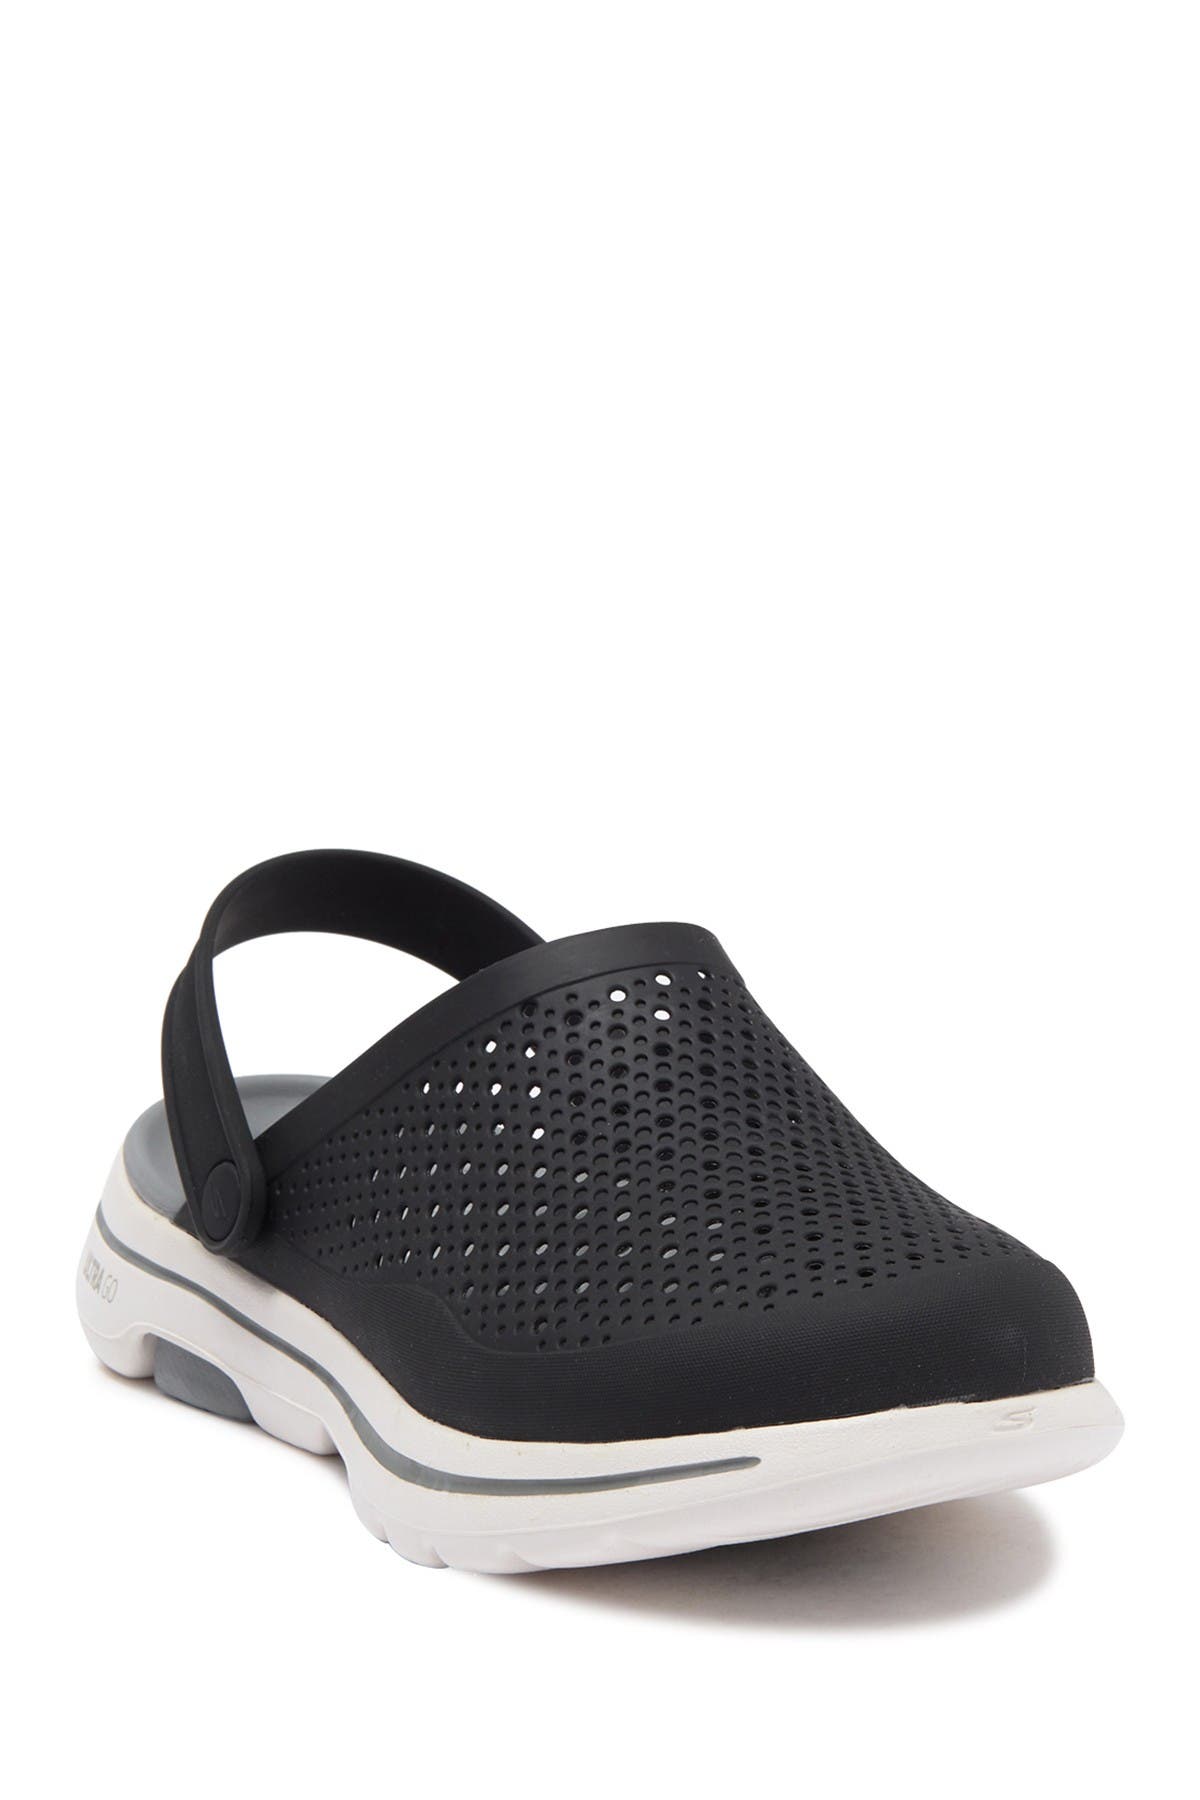 skechers perforated slip on casual shoes